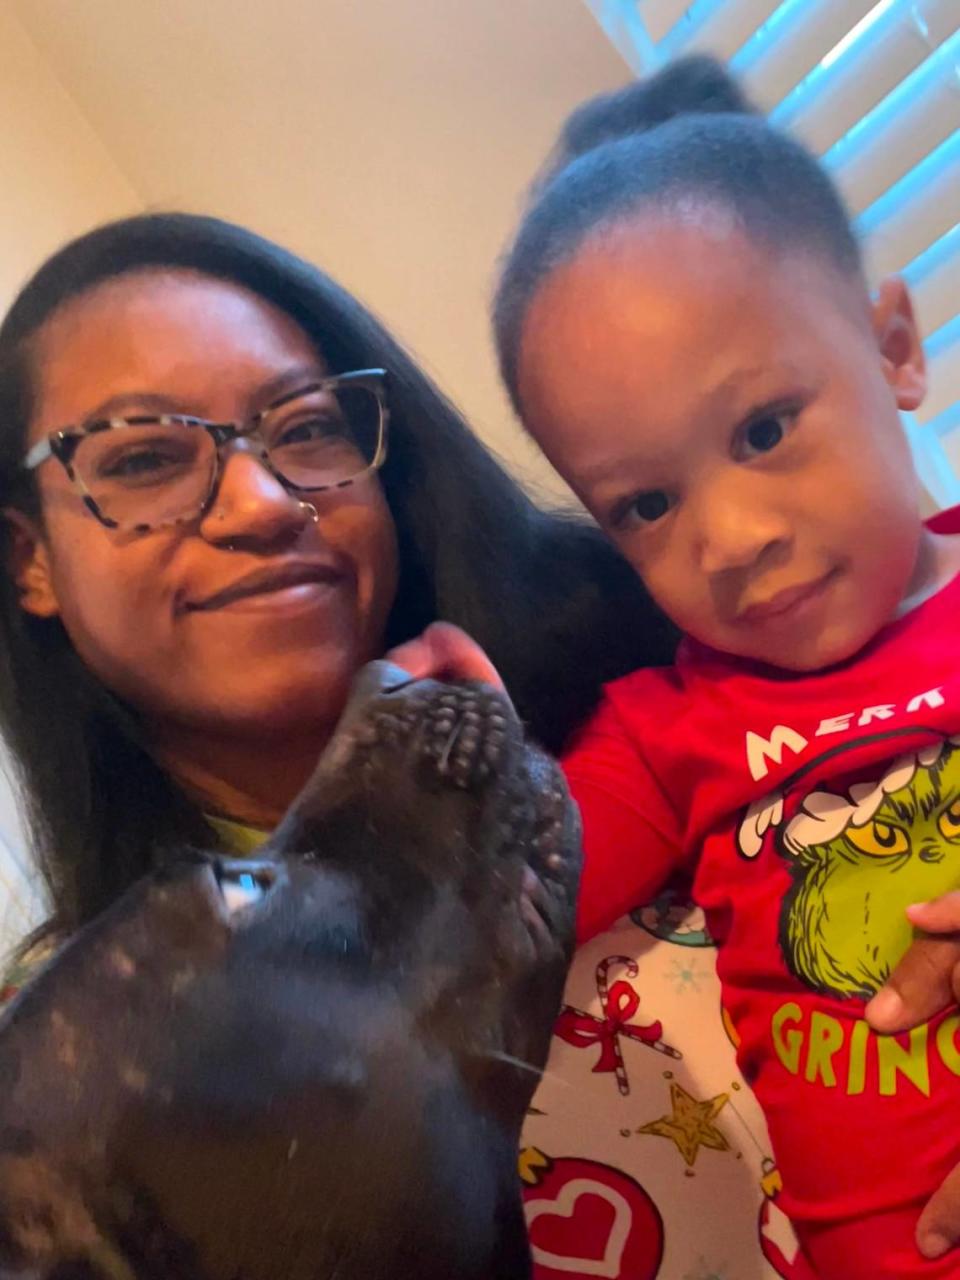 Shaniora Buford, her son Emaan, 3, and their rescue dog. The family will be receiving help around the holidays this season from The Salvation Army of Greater Charlotte’s Angel Tree fund.